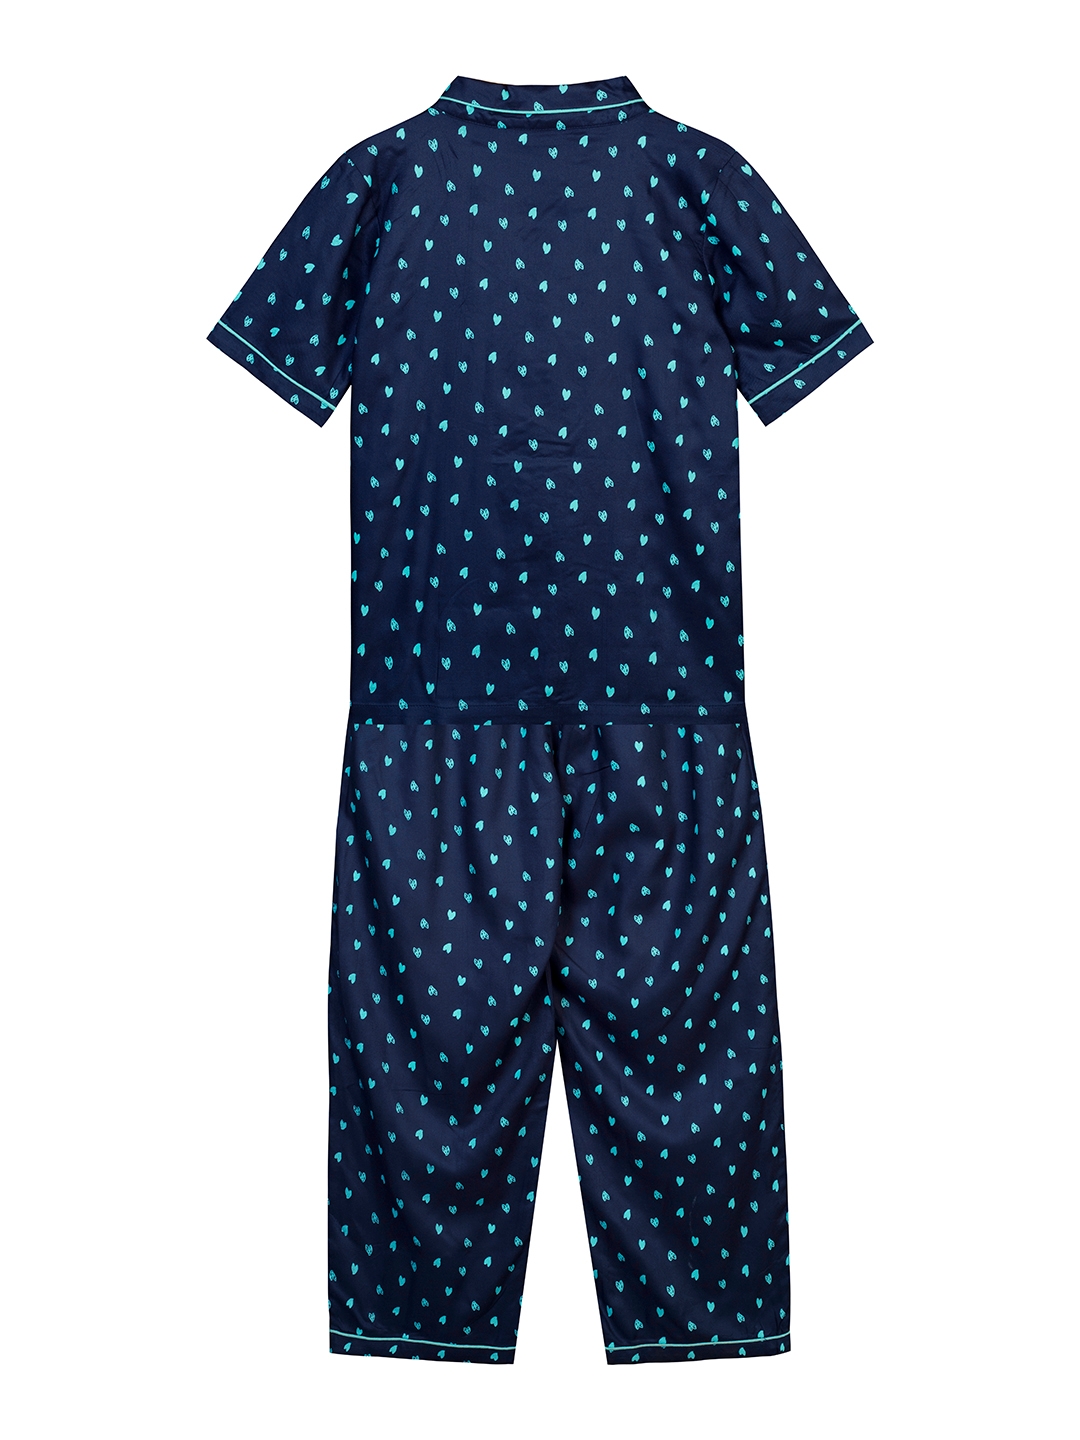 Budding Bees | Budding Bees Girls Blue Heart Printed Nightsuit 1